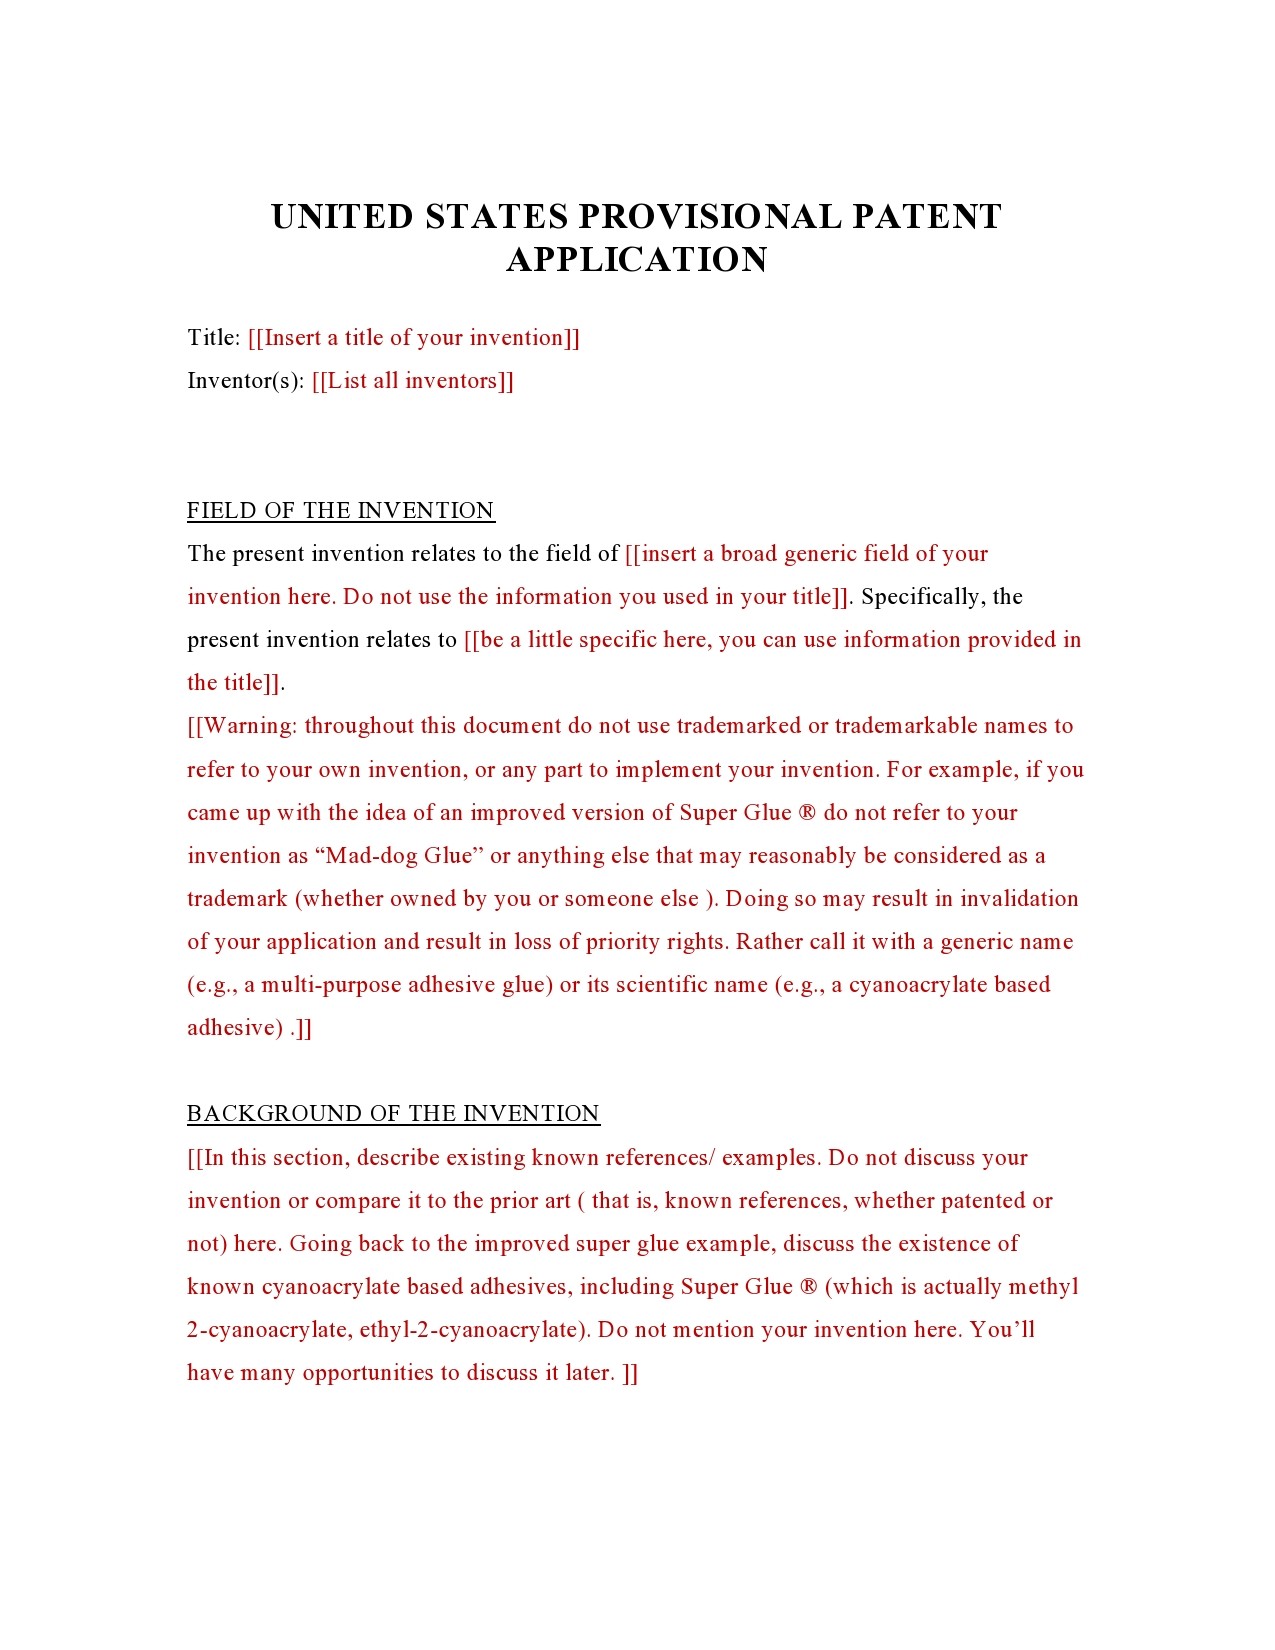 Free provisional patent application template 03